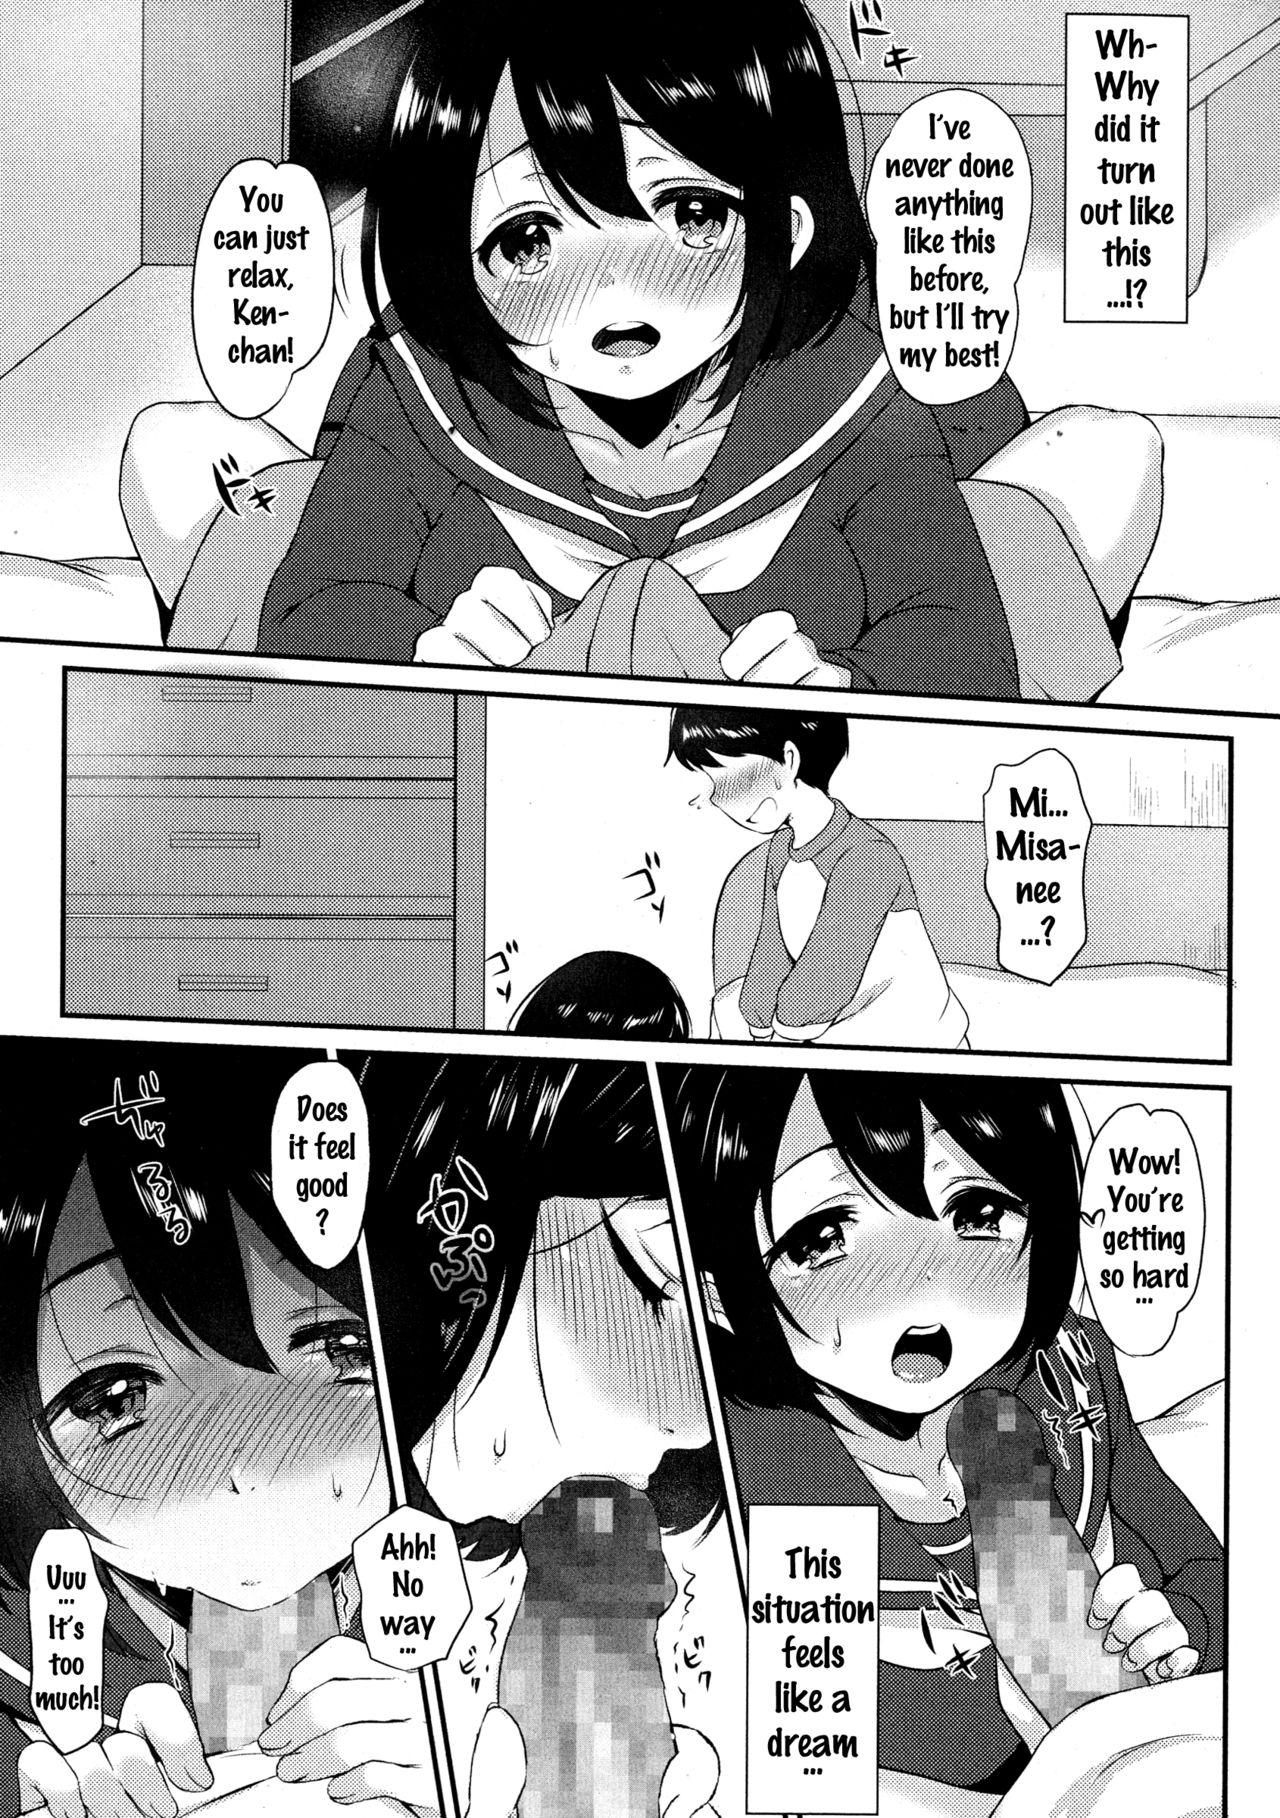 [Paragasu] Onee-san to Issho | Together with Onee-chan (COMIC JSCK Vol. 6) [English] {doujins.com} 4